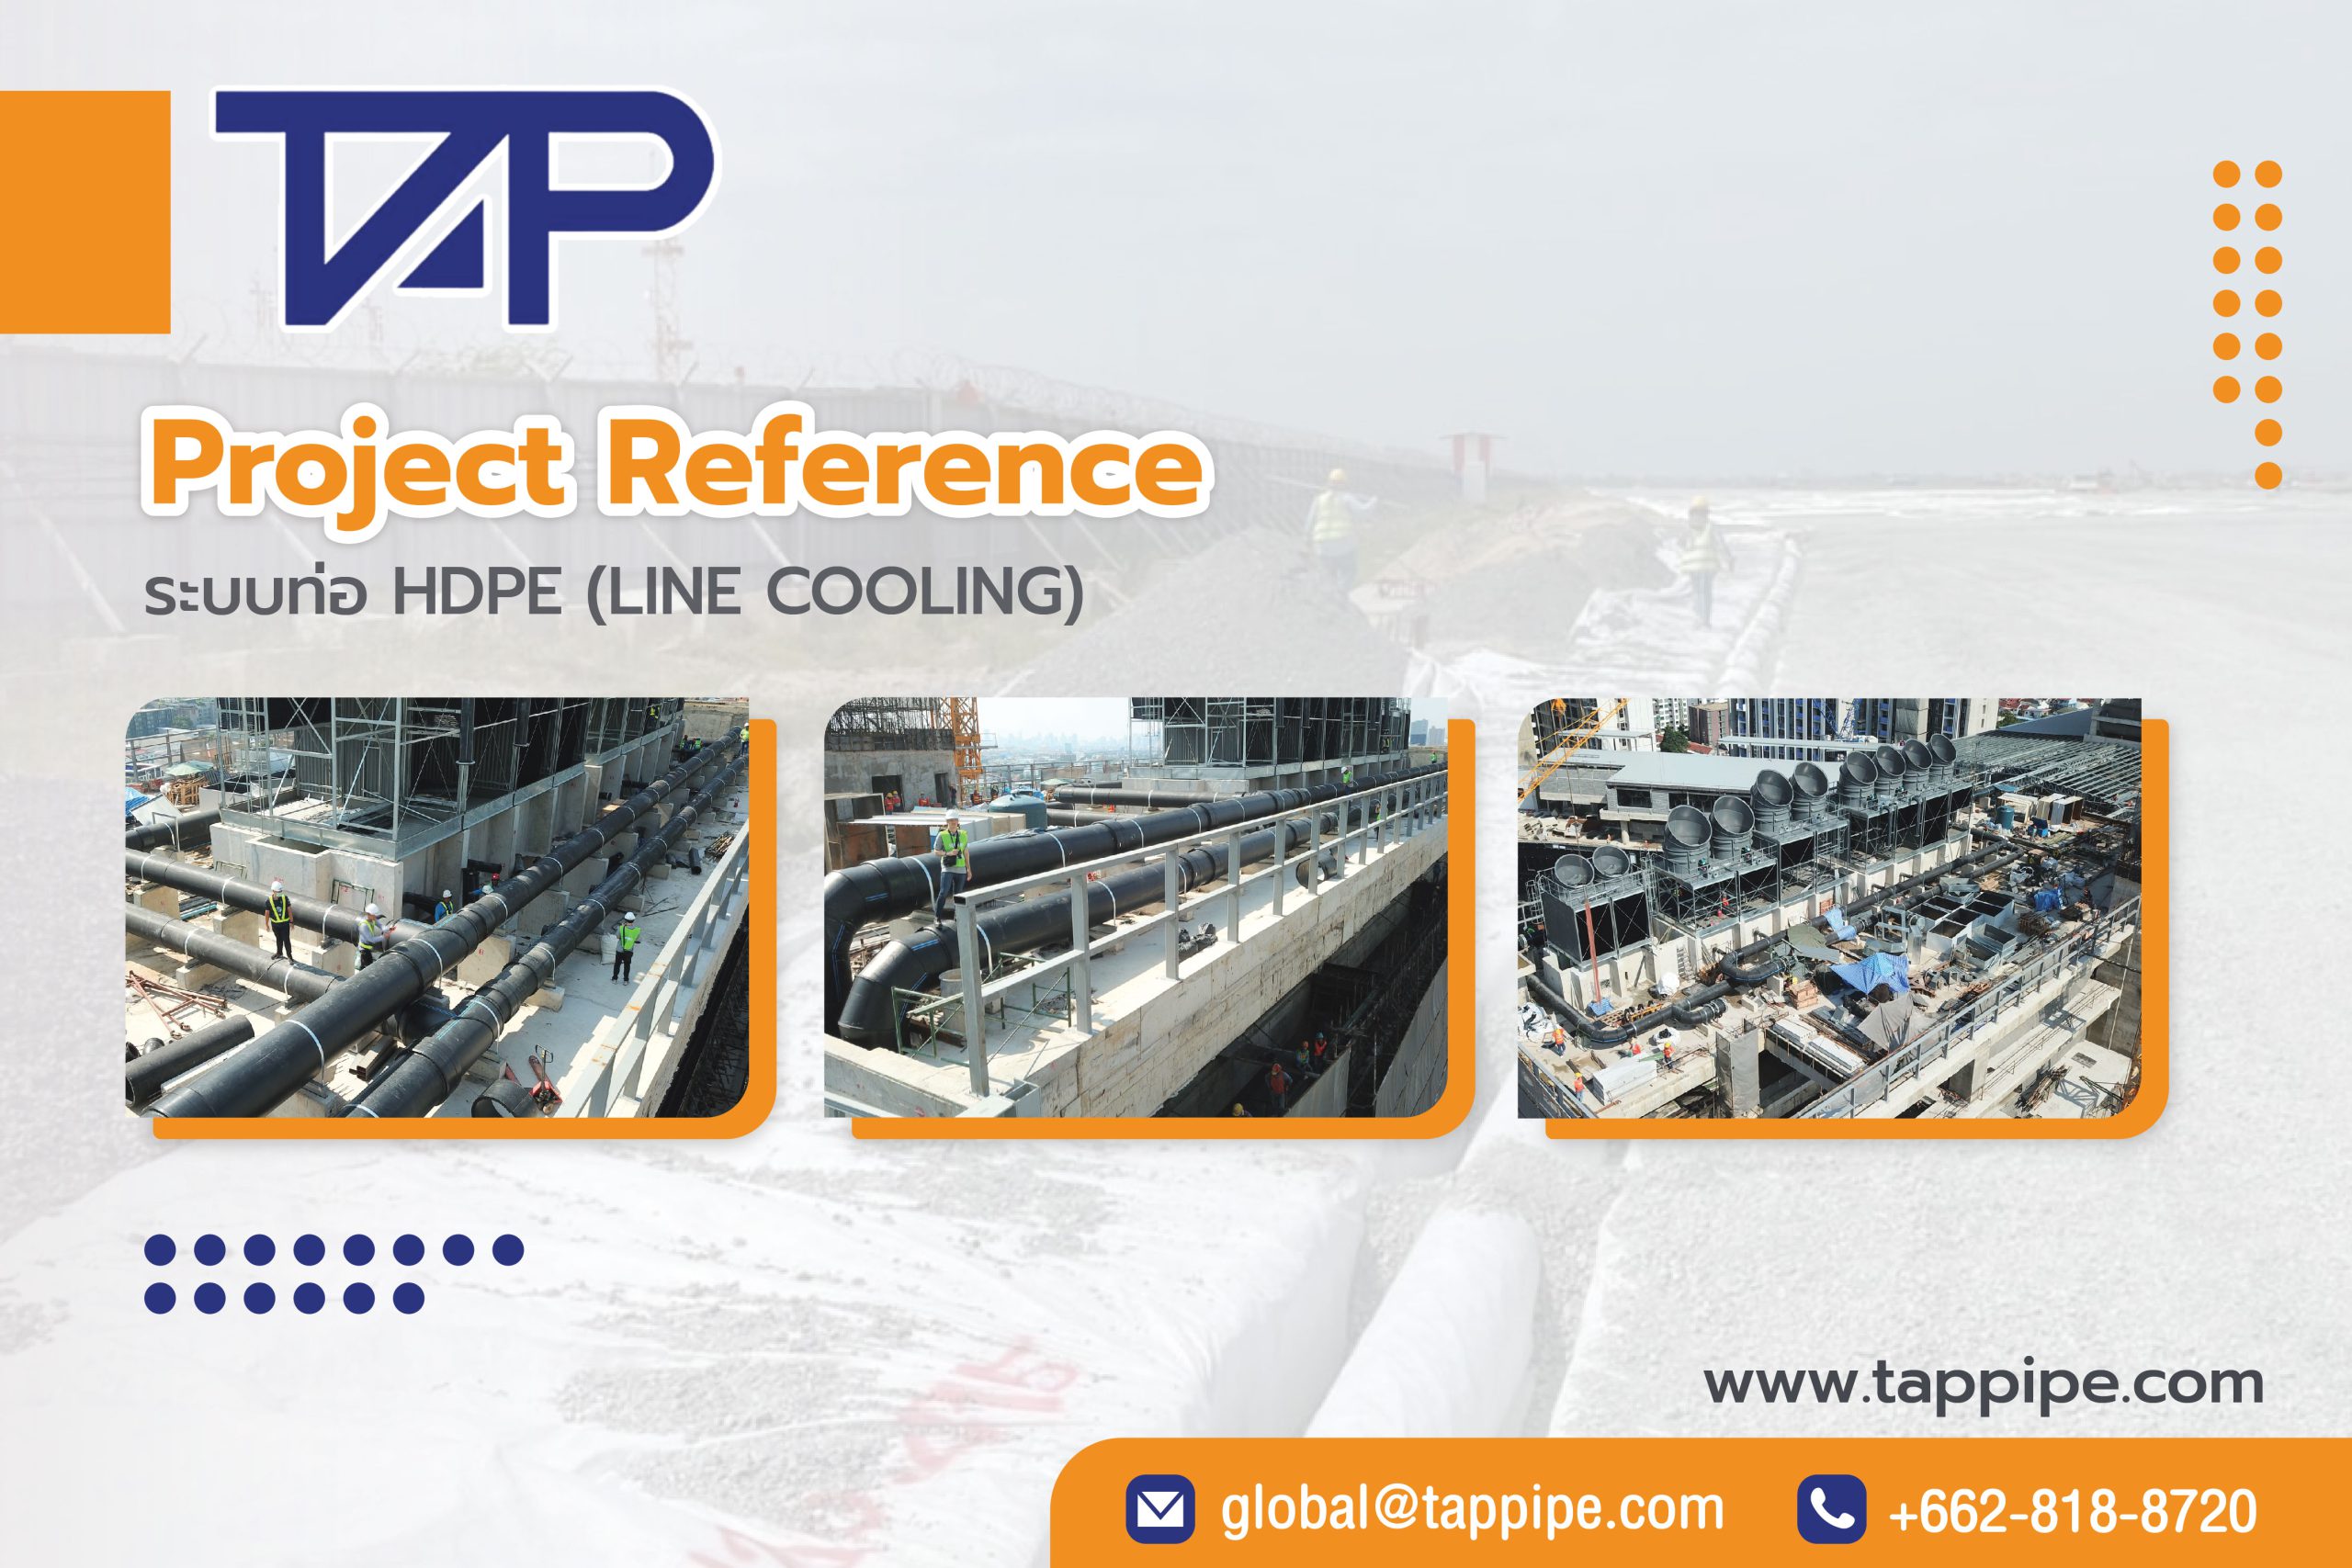 Cover : HDPE pipe system line cooling